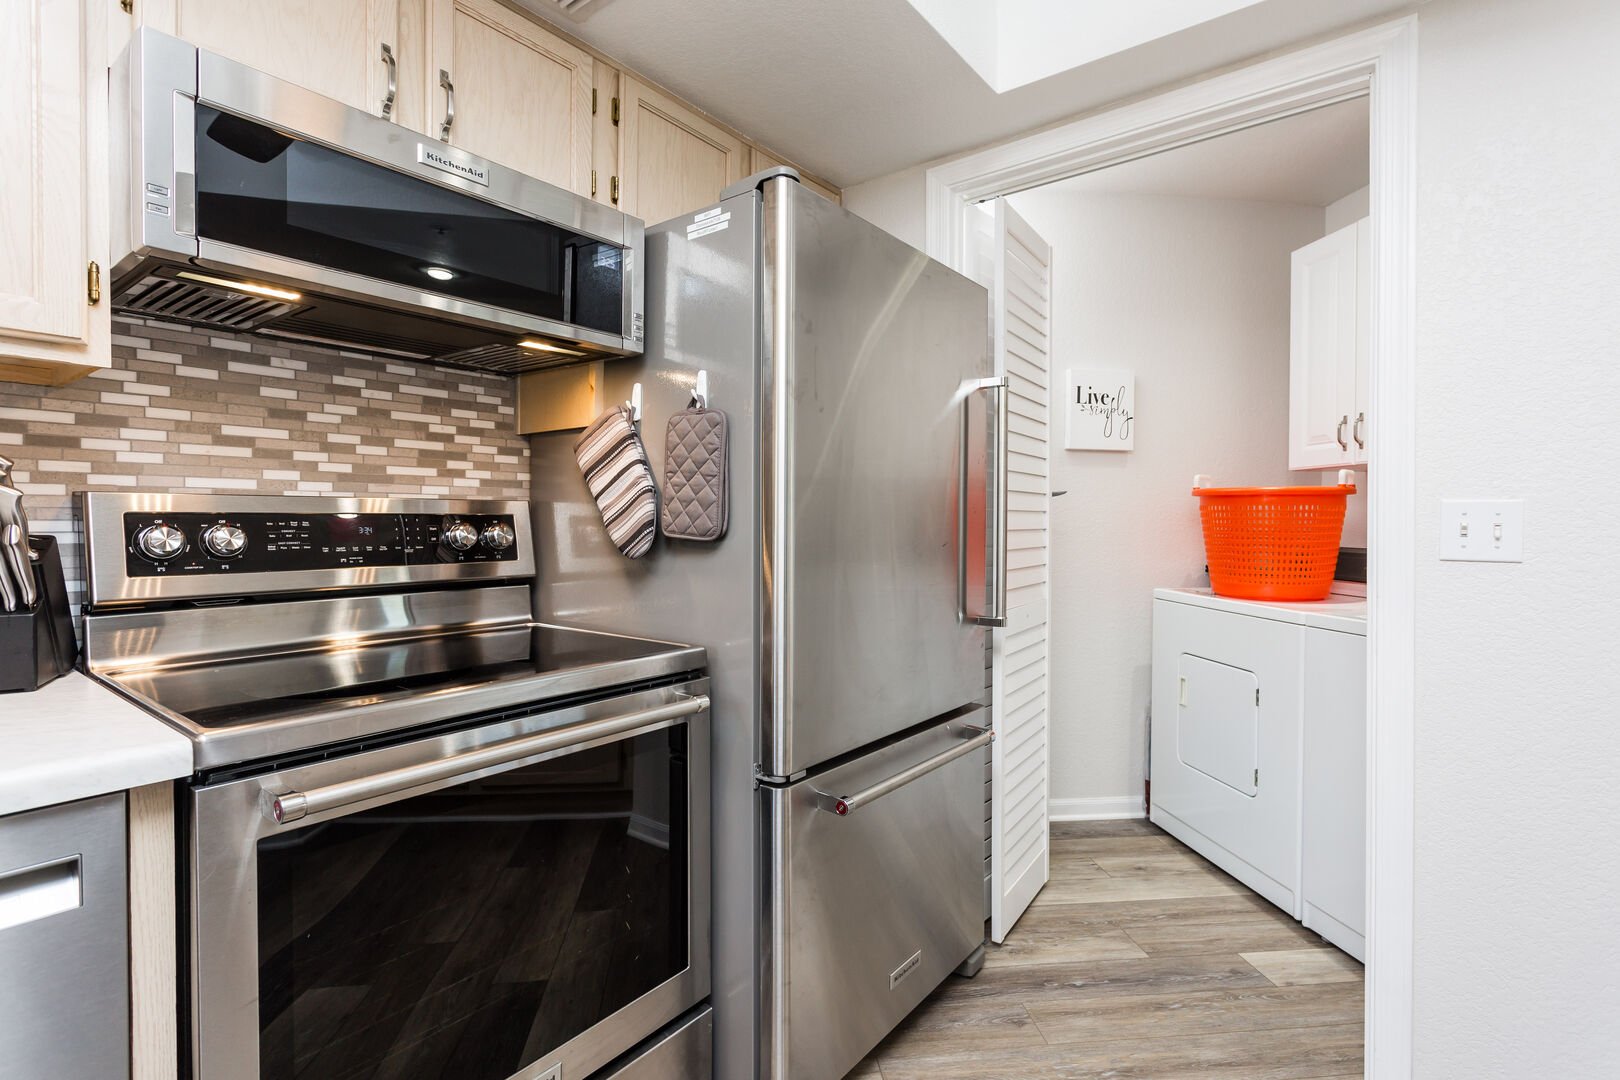 Surprise! A hidden laundry room so you don't have to pack everything you own for a month stay!